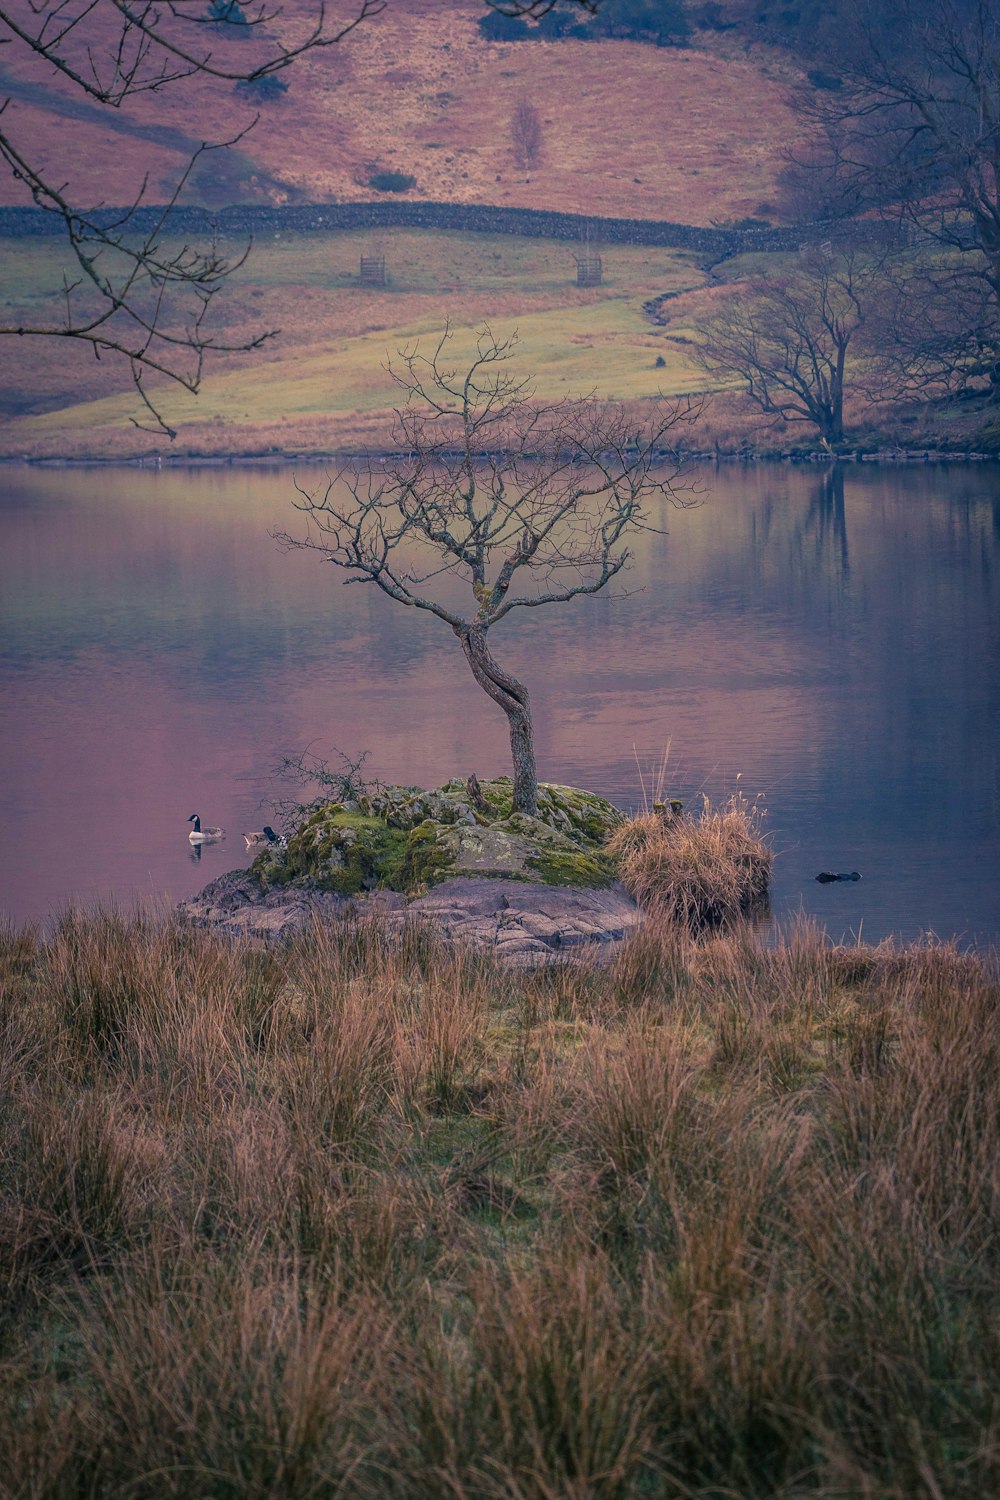 a lone tree on a small island in the middle of a lake